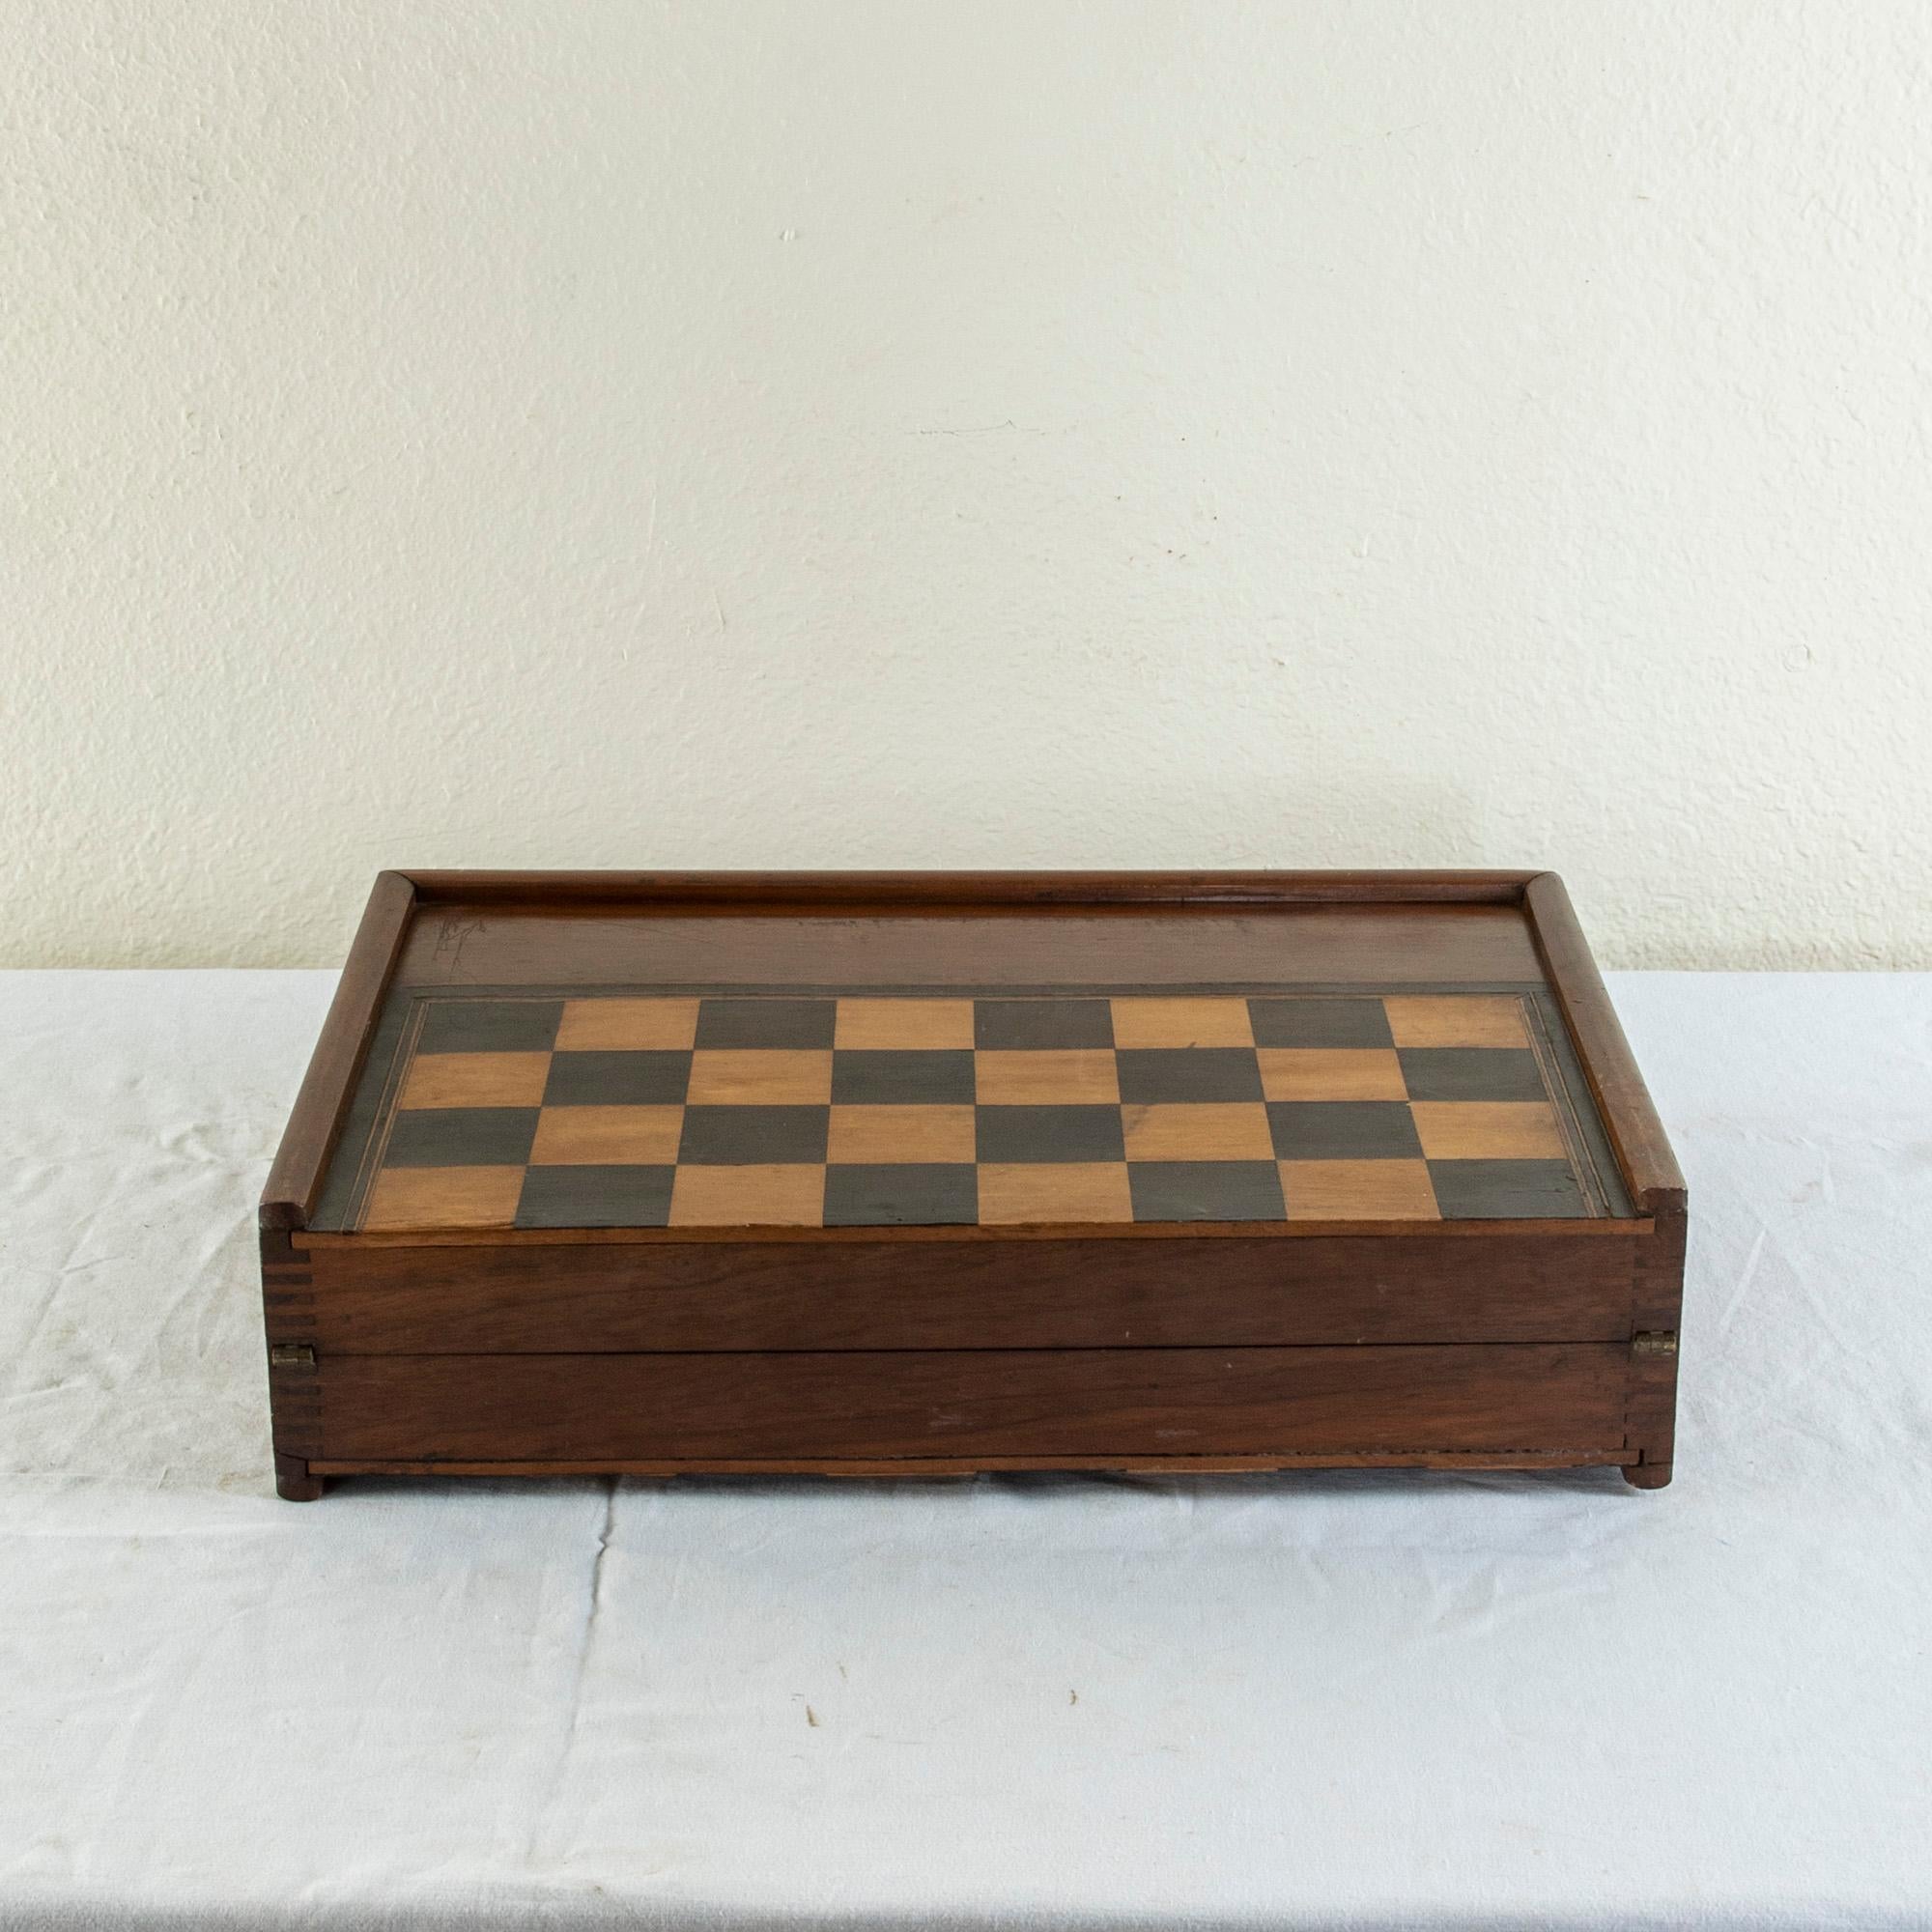 Leather 19th Century, Walnut Marquetry Folding Game Box for Chess, Checkers, Backgammon